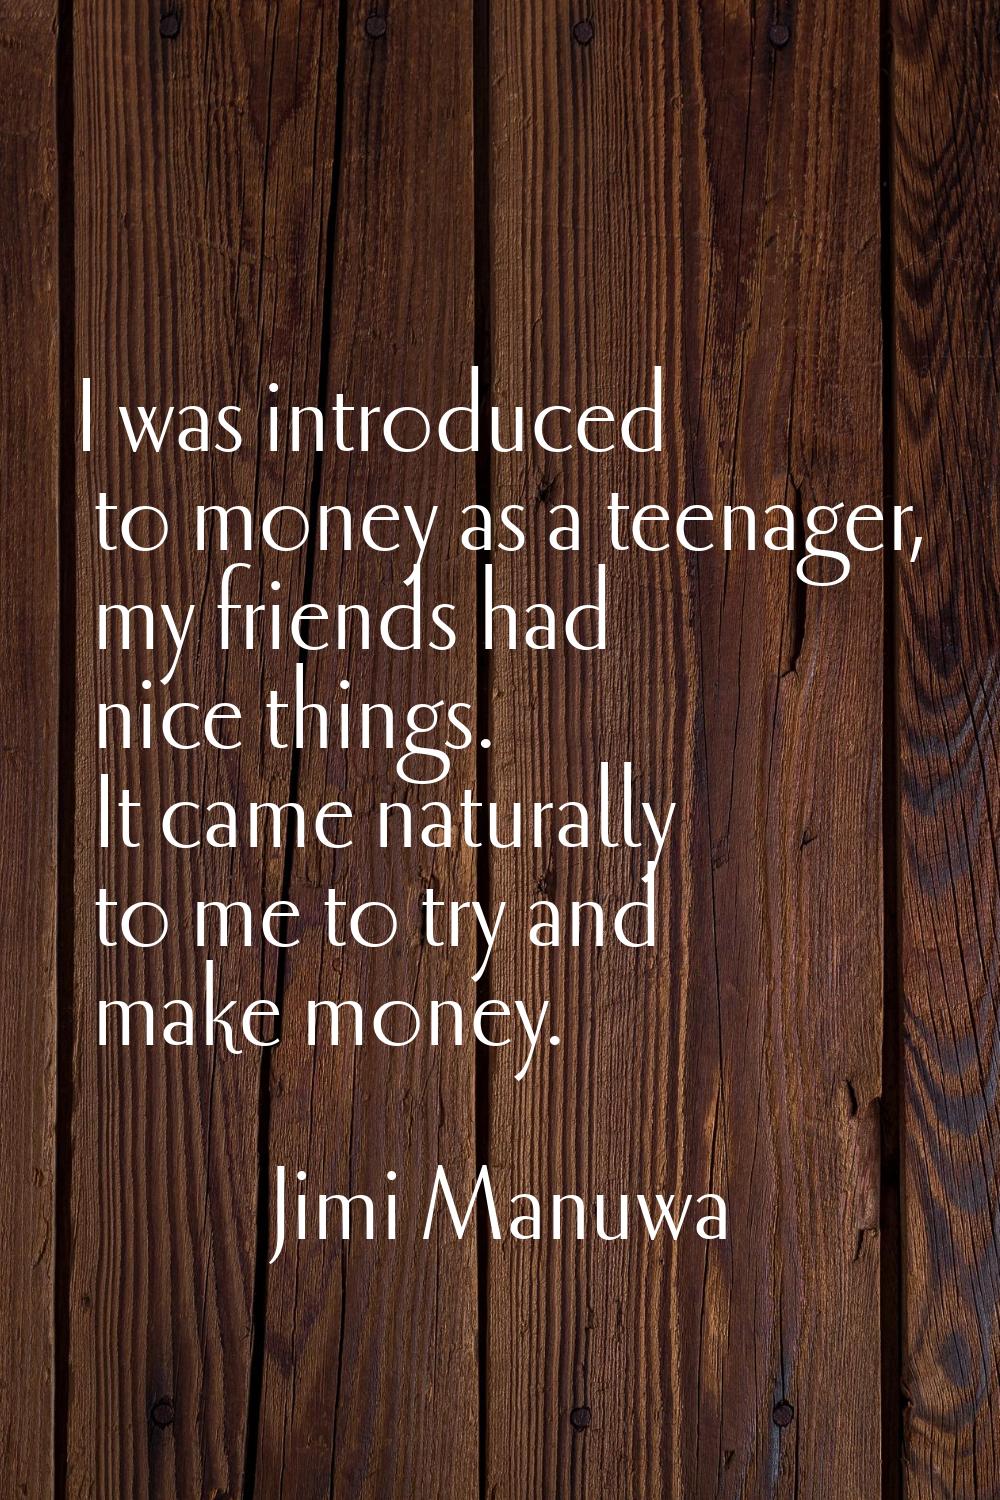 I was introduced to money as a teenager, my friends had nice things. It came naturally to me to try